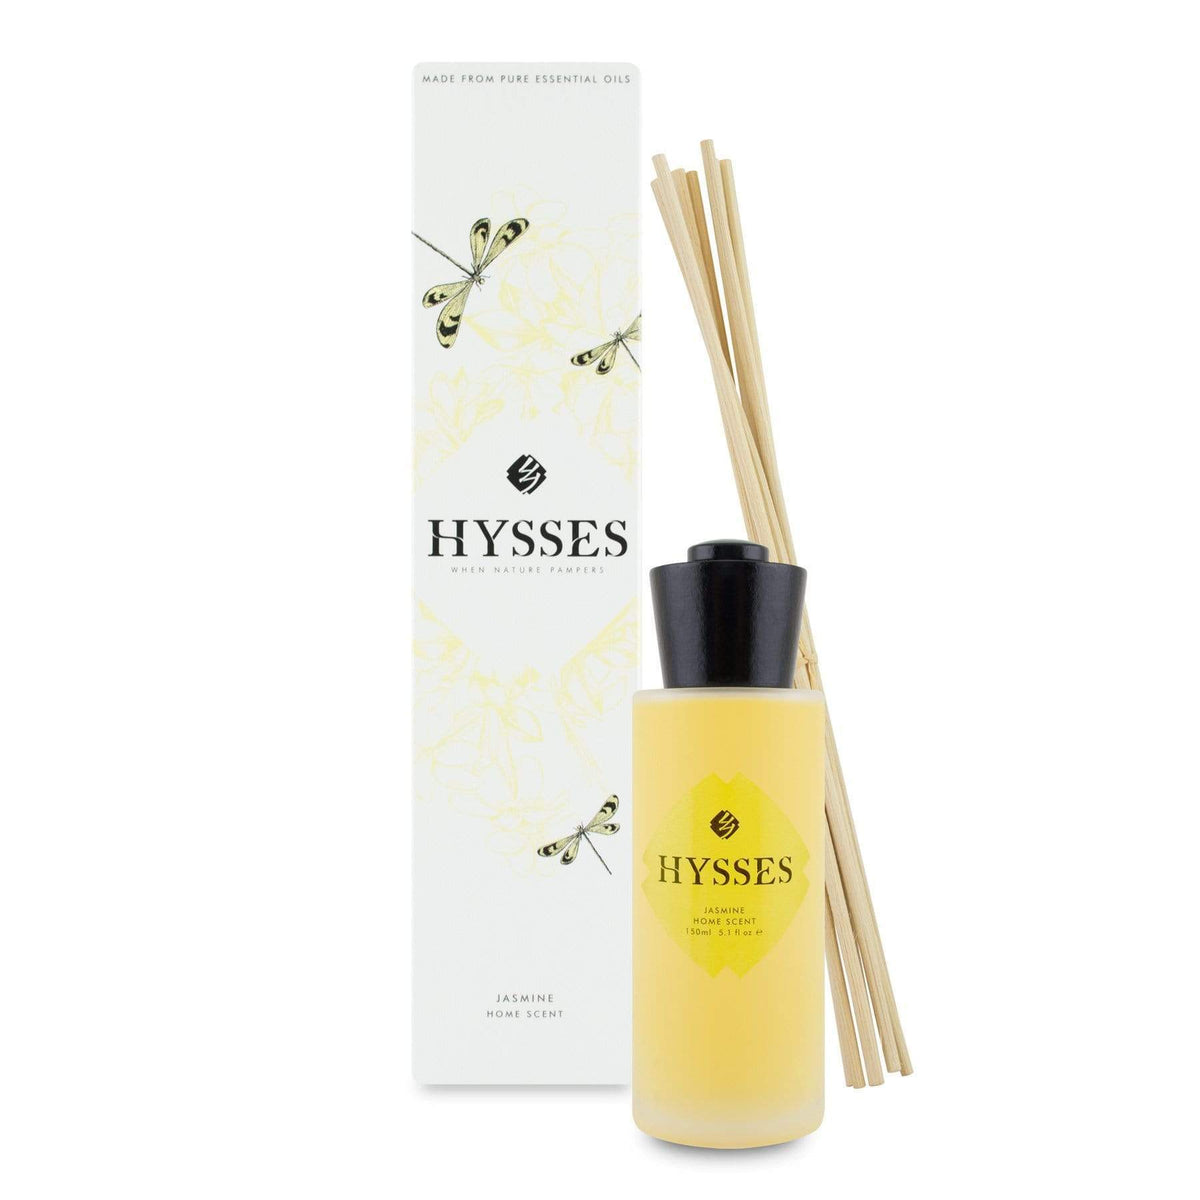 Hysses Home Scents 150ml Home Scent Reed Diffuser Jasmine